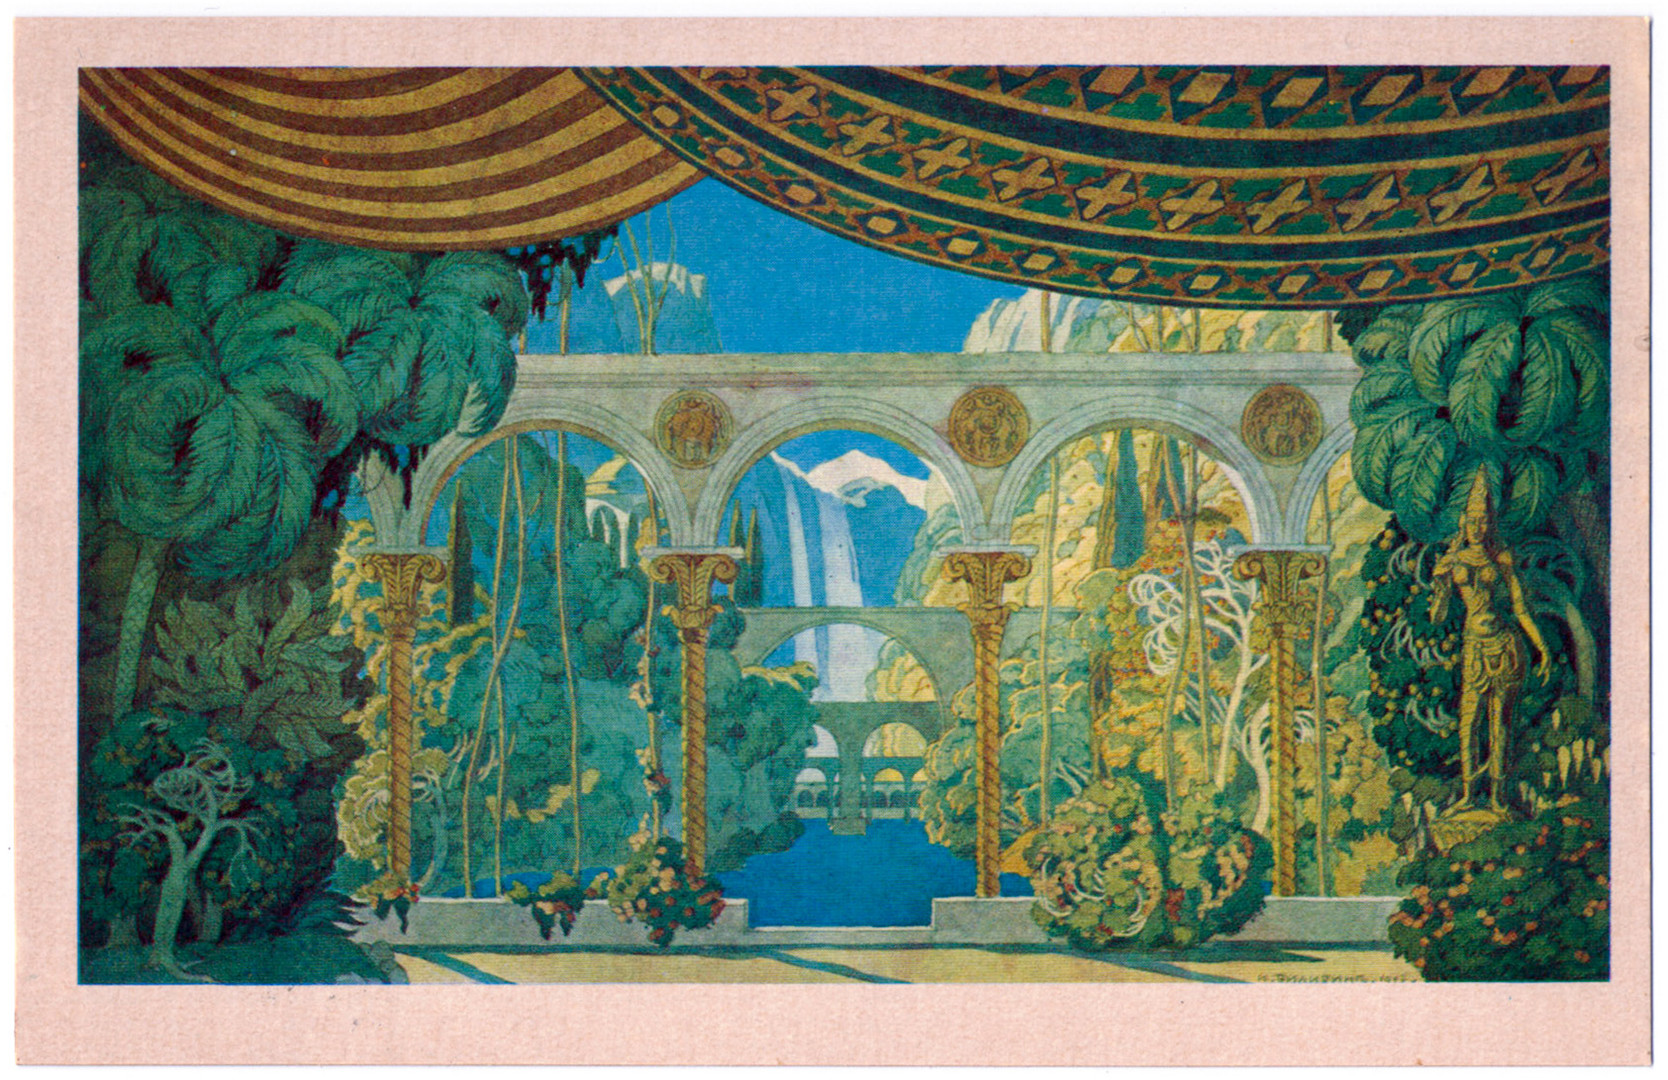 Bilibin's stage decorations for the opera “Ruslan and Ludmila.”